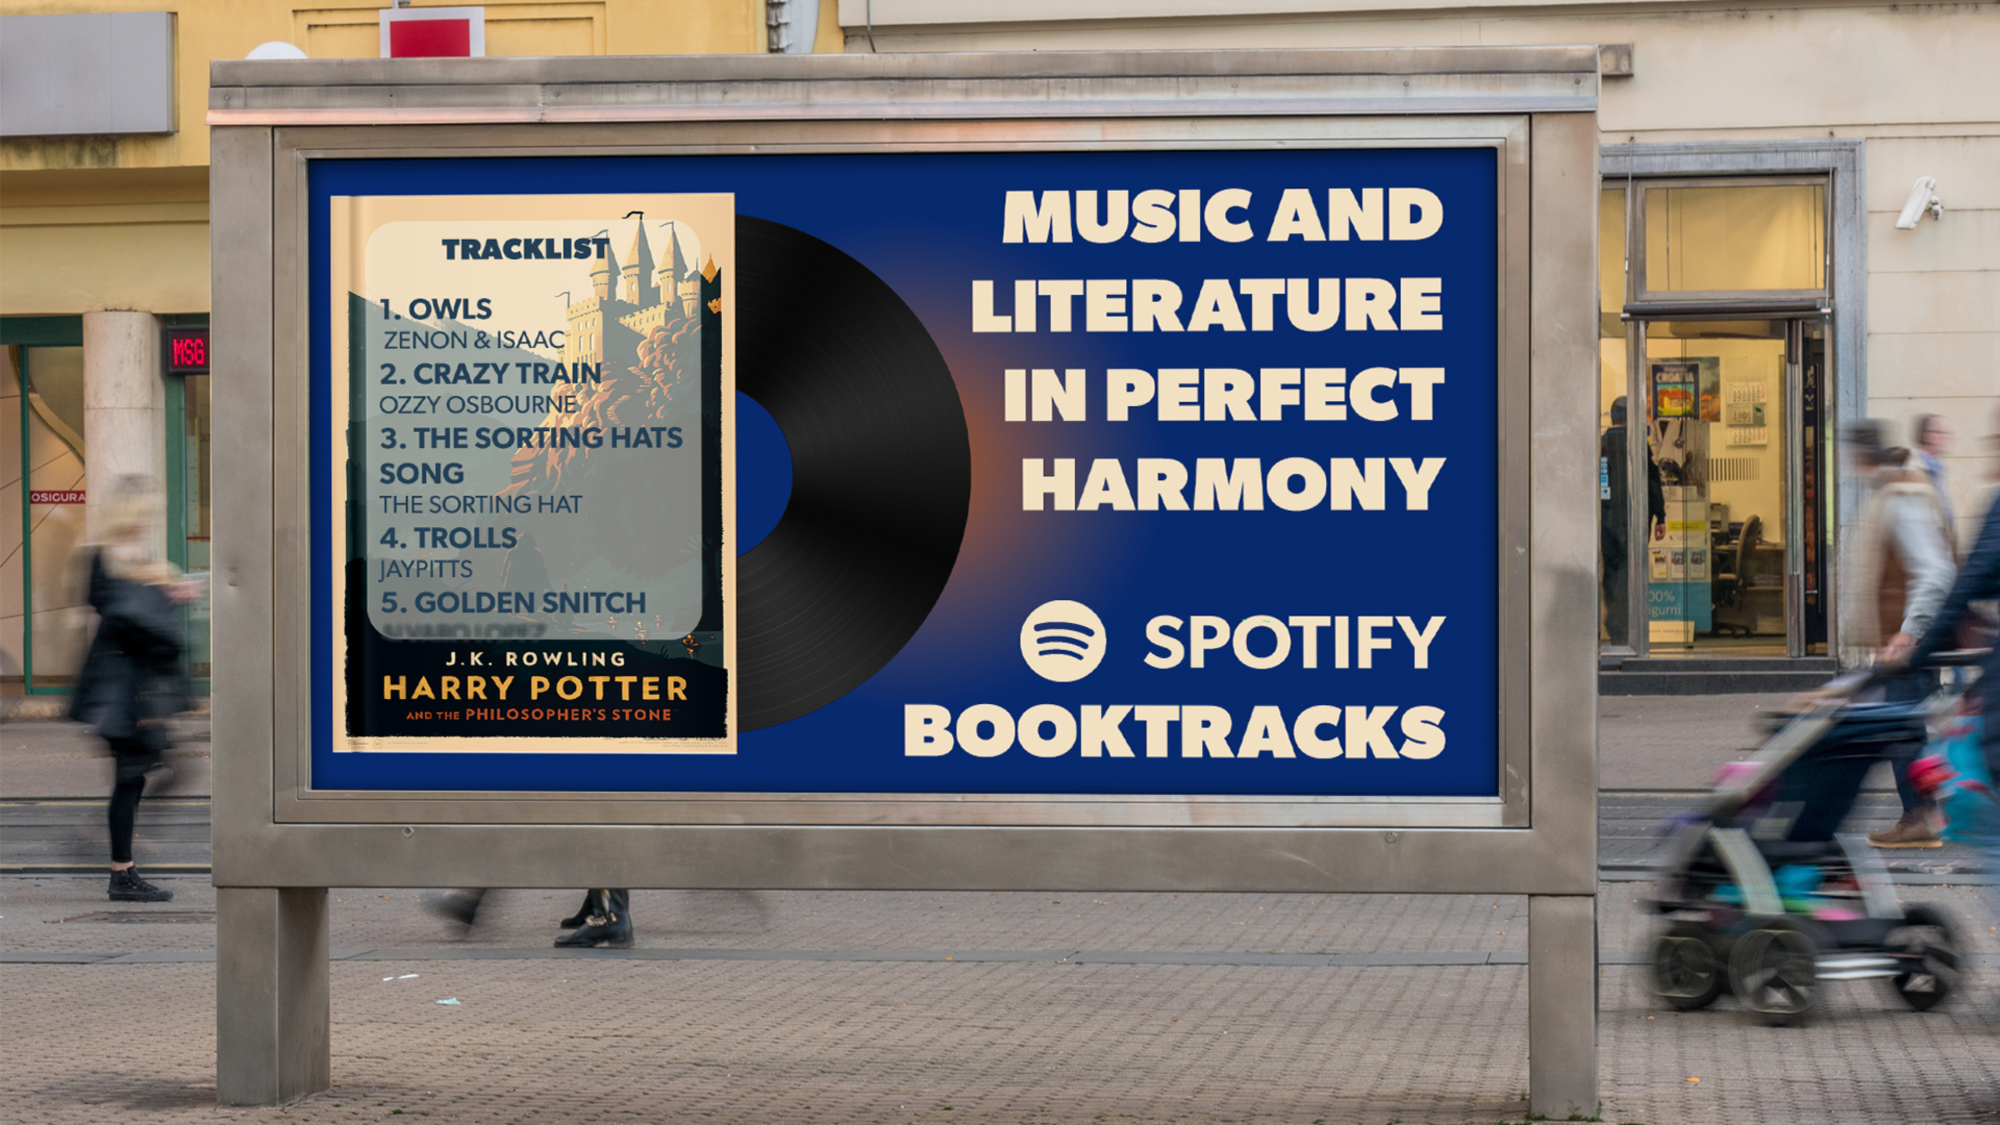  "music and literature in perfect harmony"